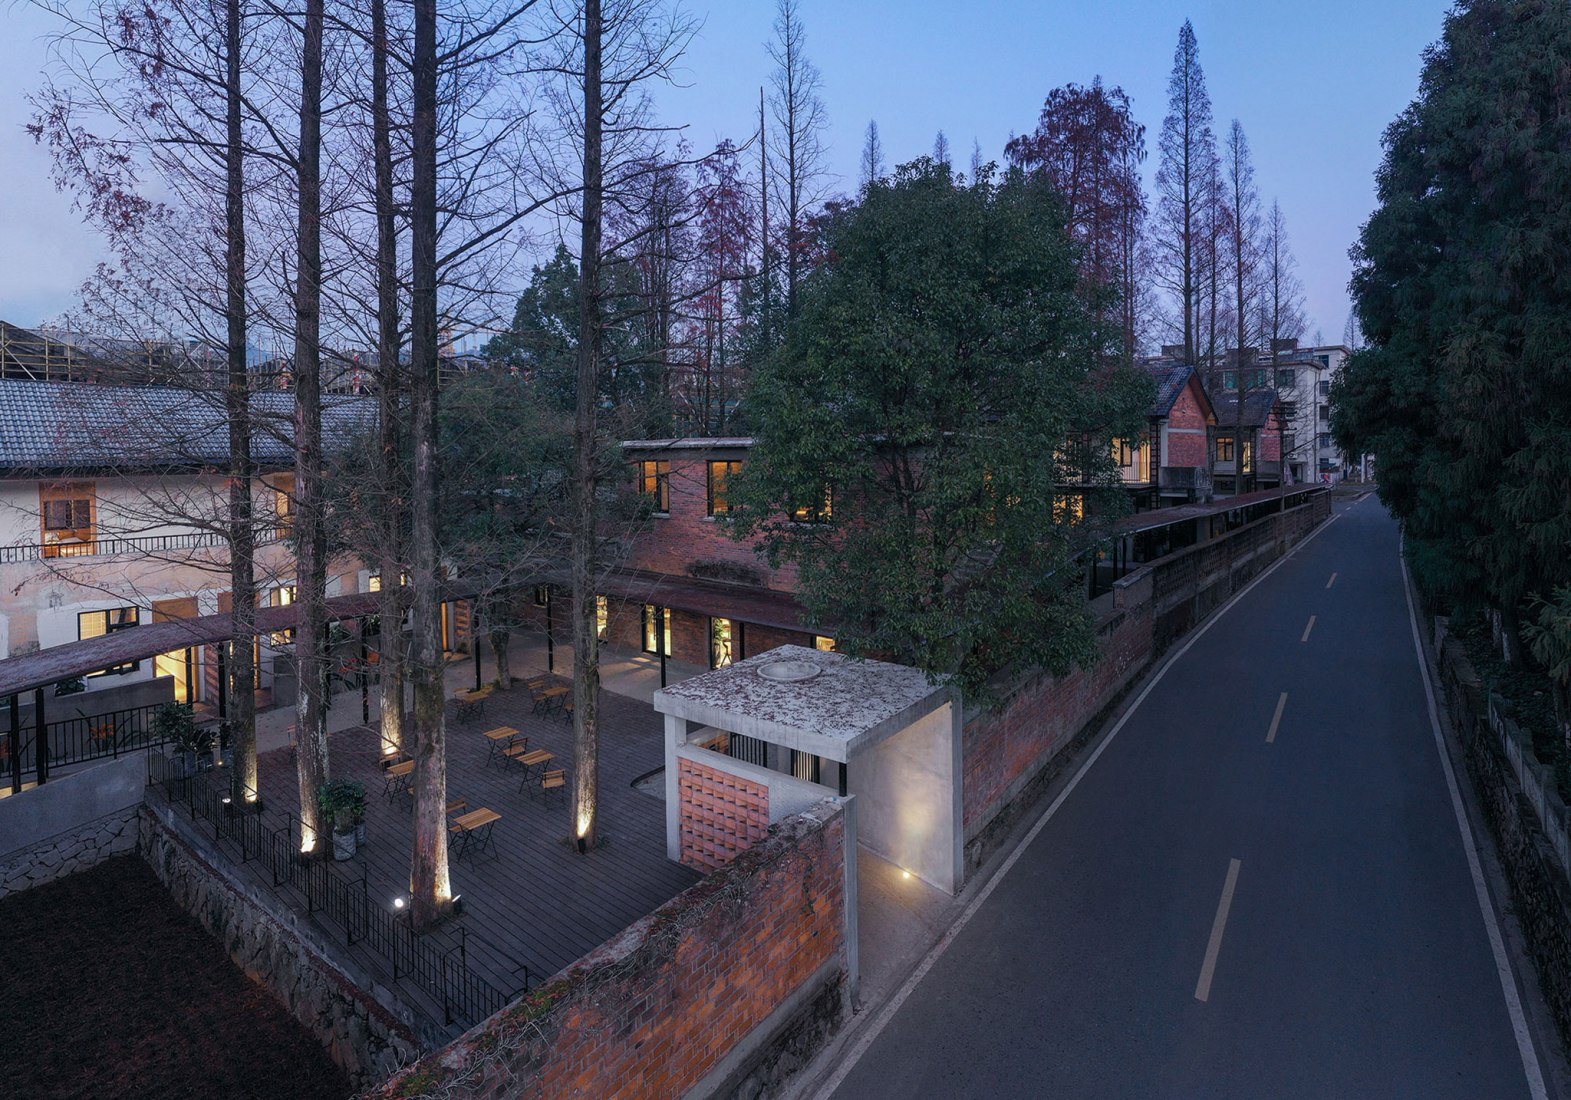 Pushe - Xikou Homestay by y.ad studio. Photograph by SCHRAN.